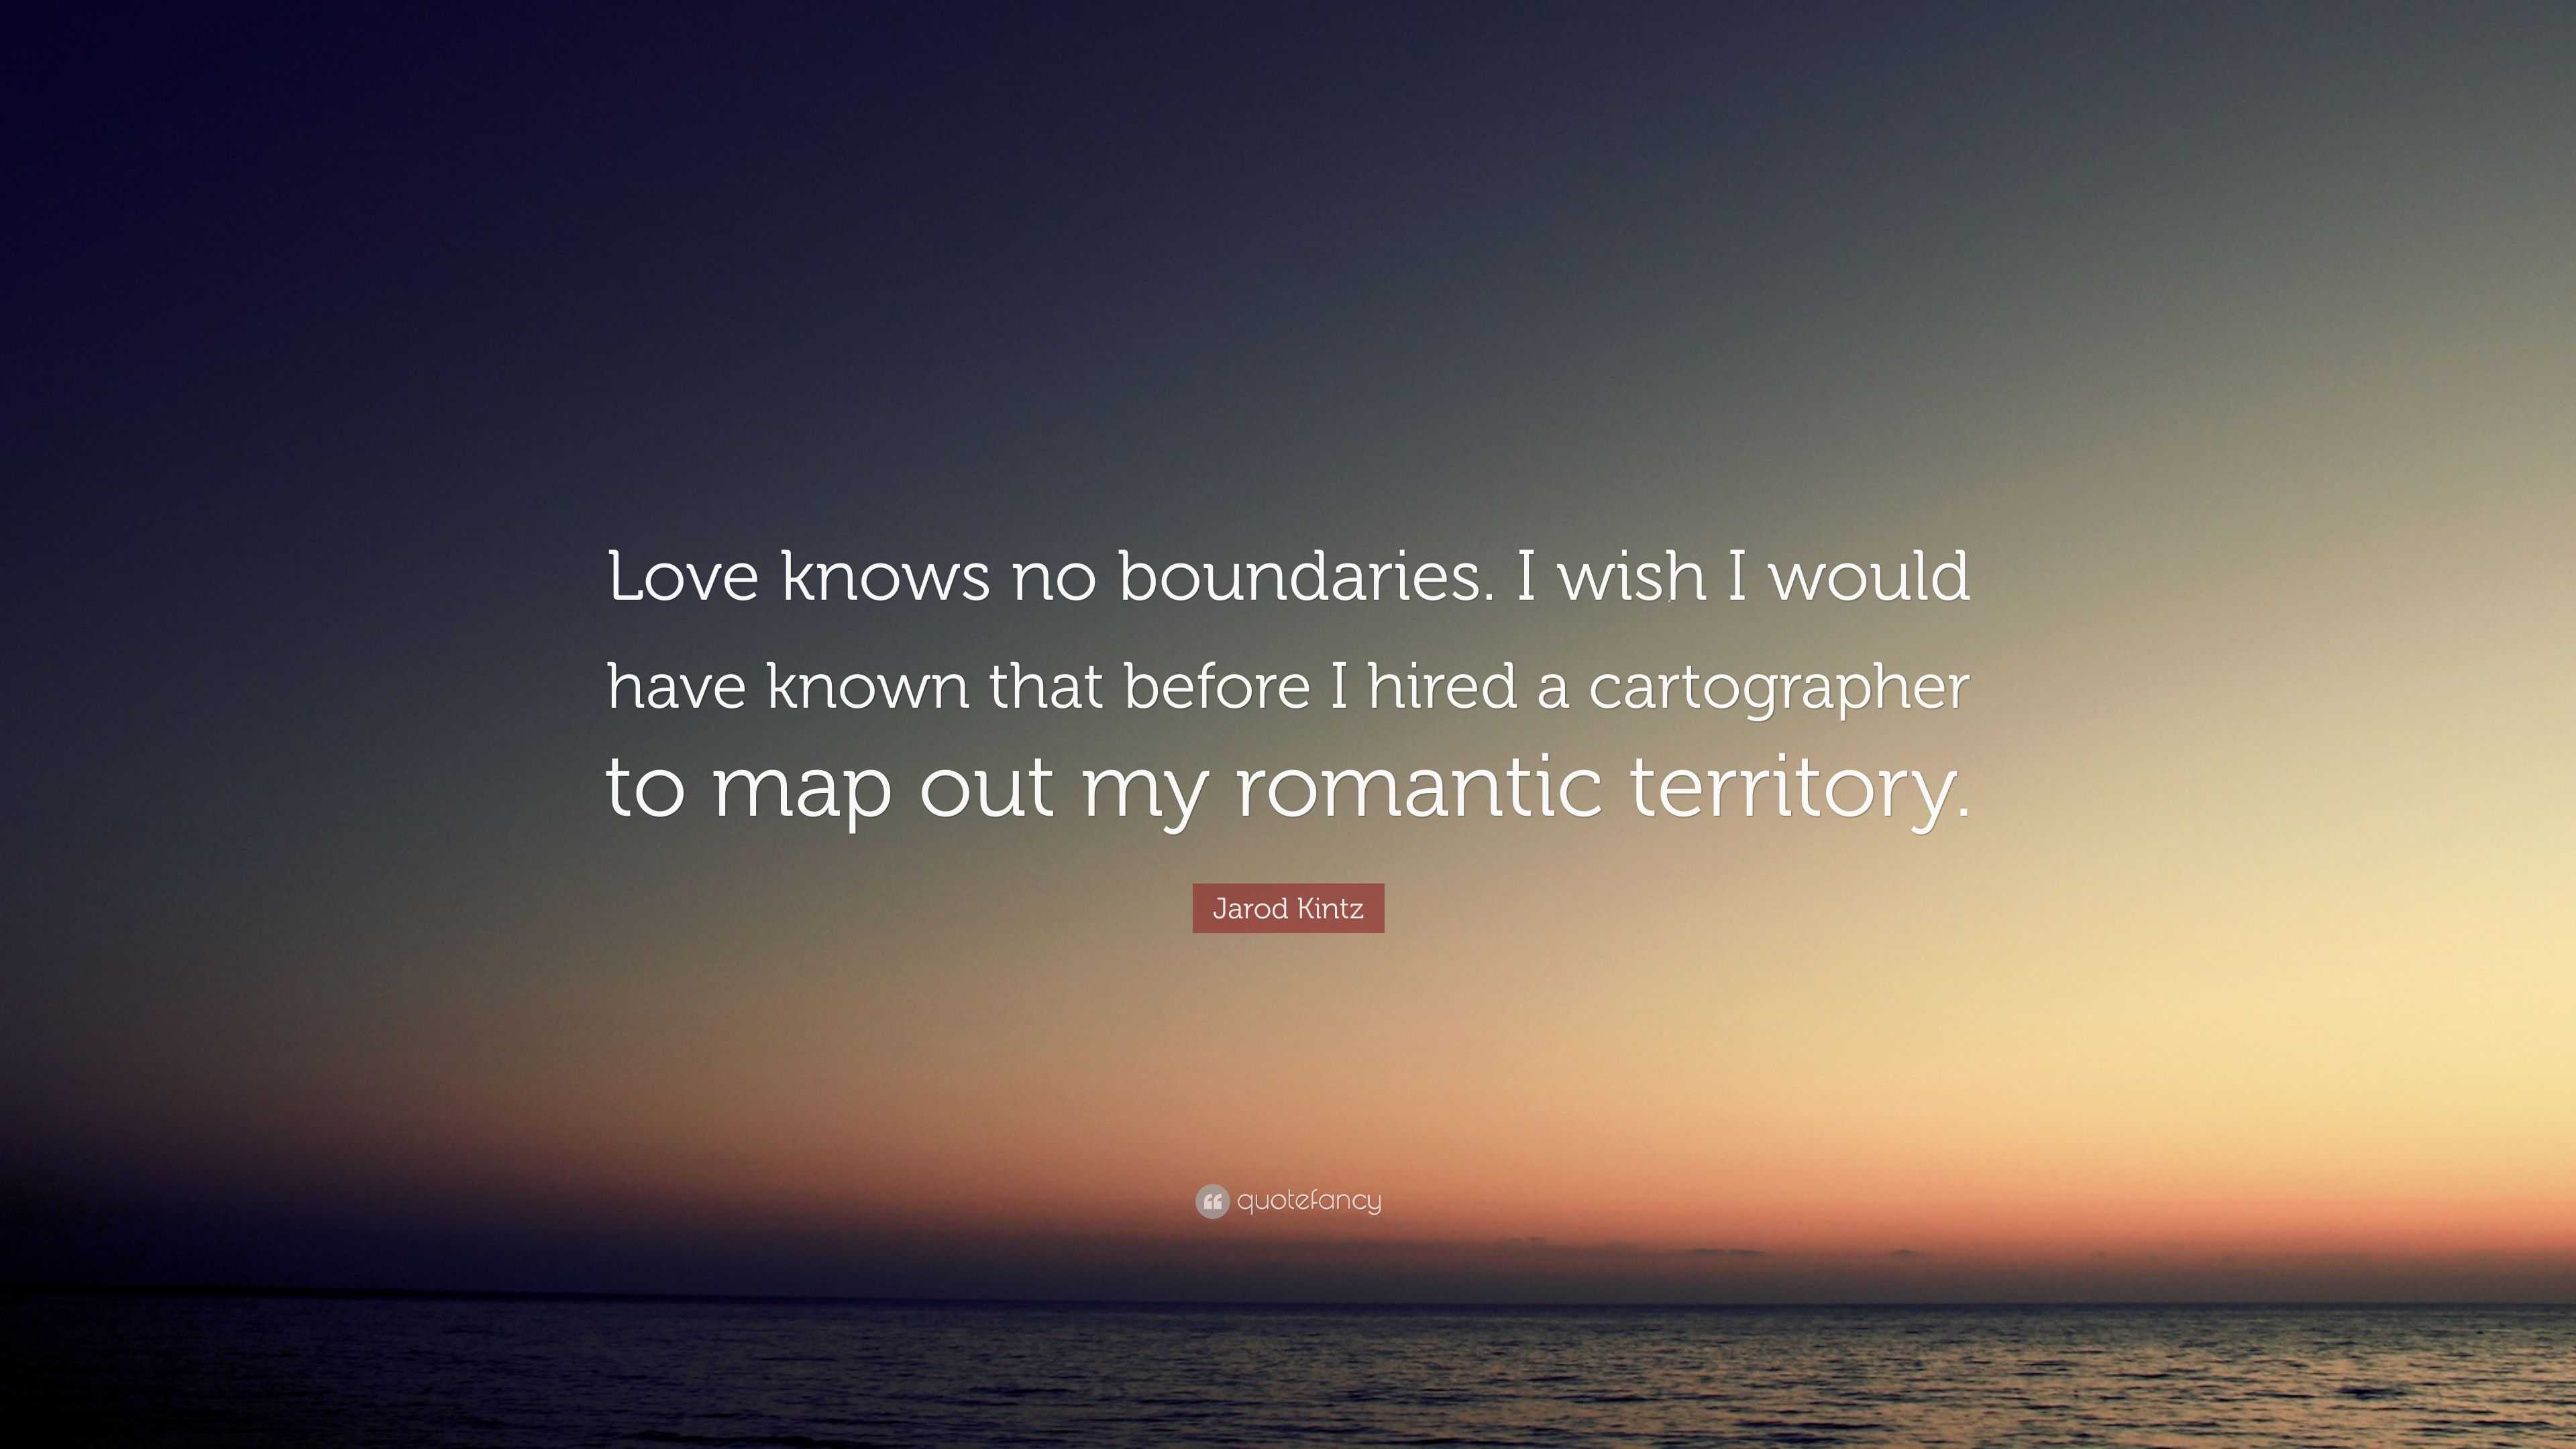 Jarod Kintz Quote Love Knows No Boundaries I Wish I Would Have Known That Before I